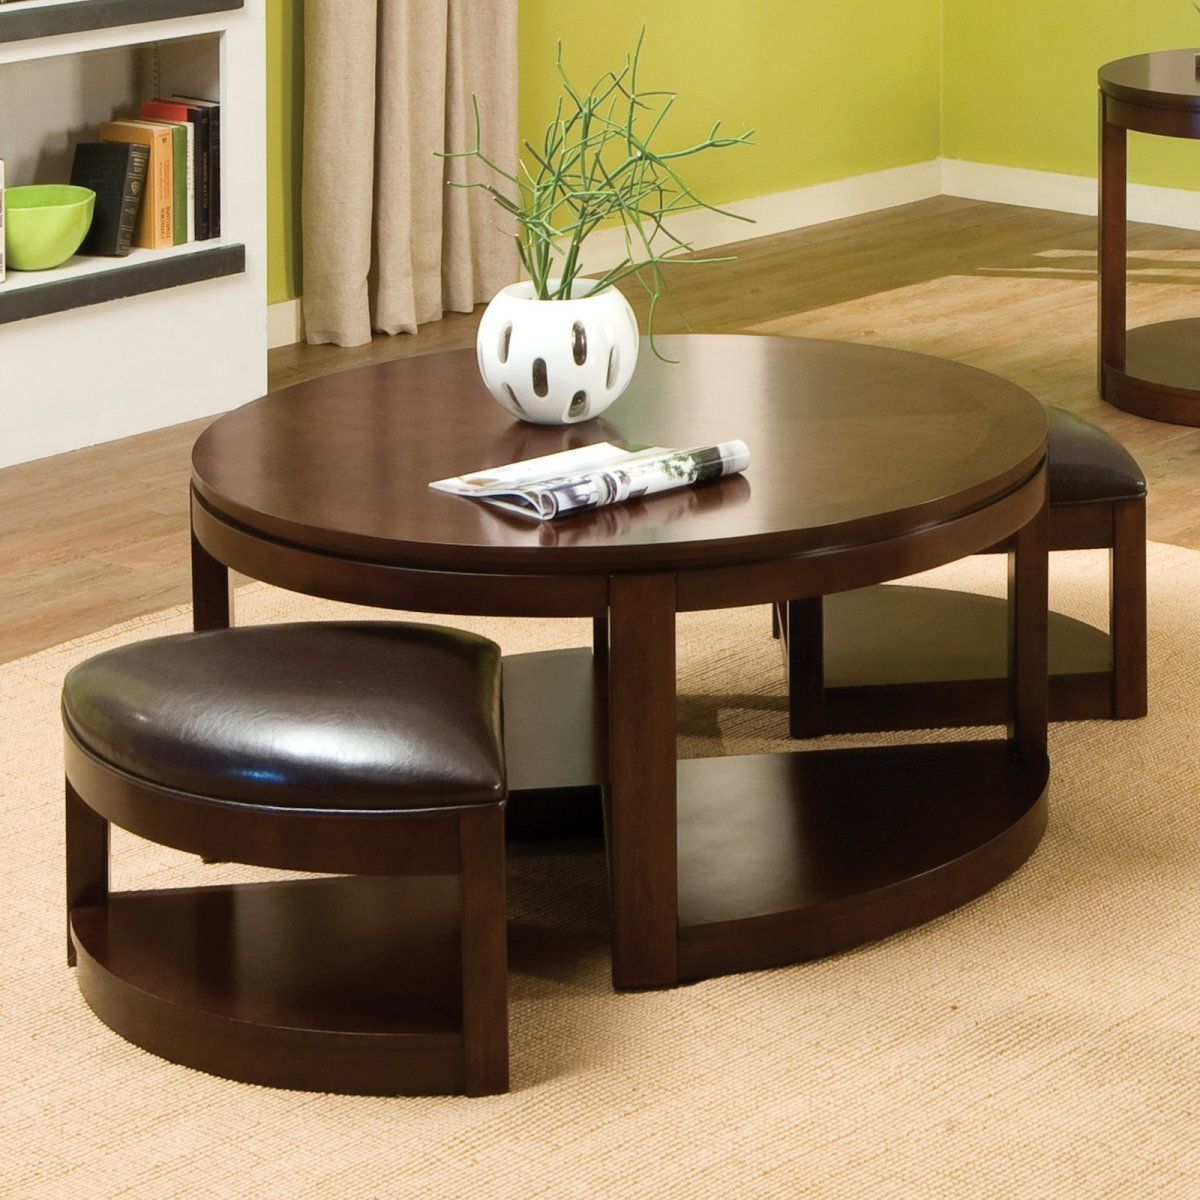 Well Liked Espresso Wood Storage Coffee Tables With The Round Coffee Tables With Storage – The Simple And (View 6 of 20)